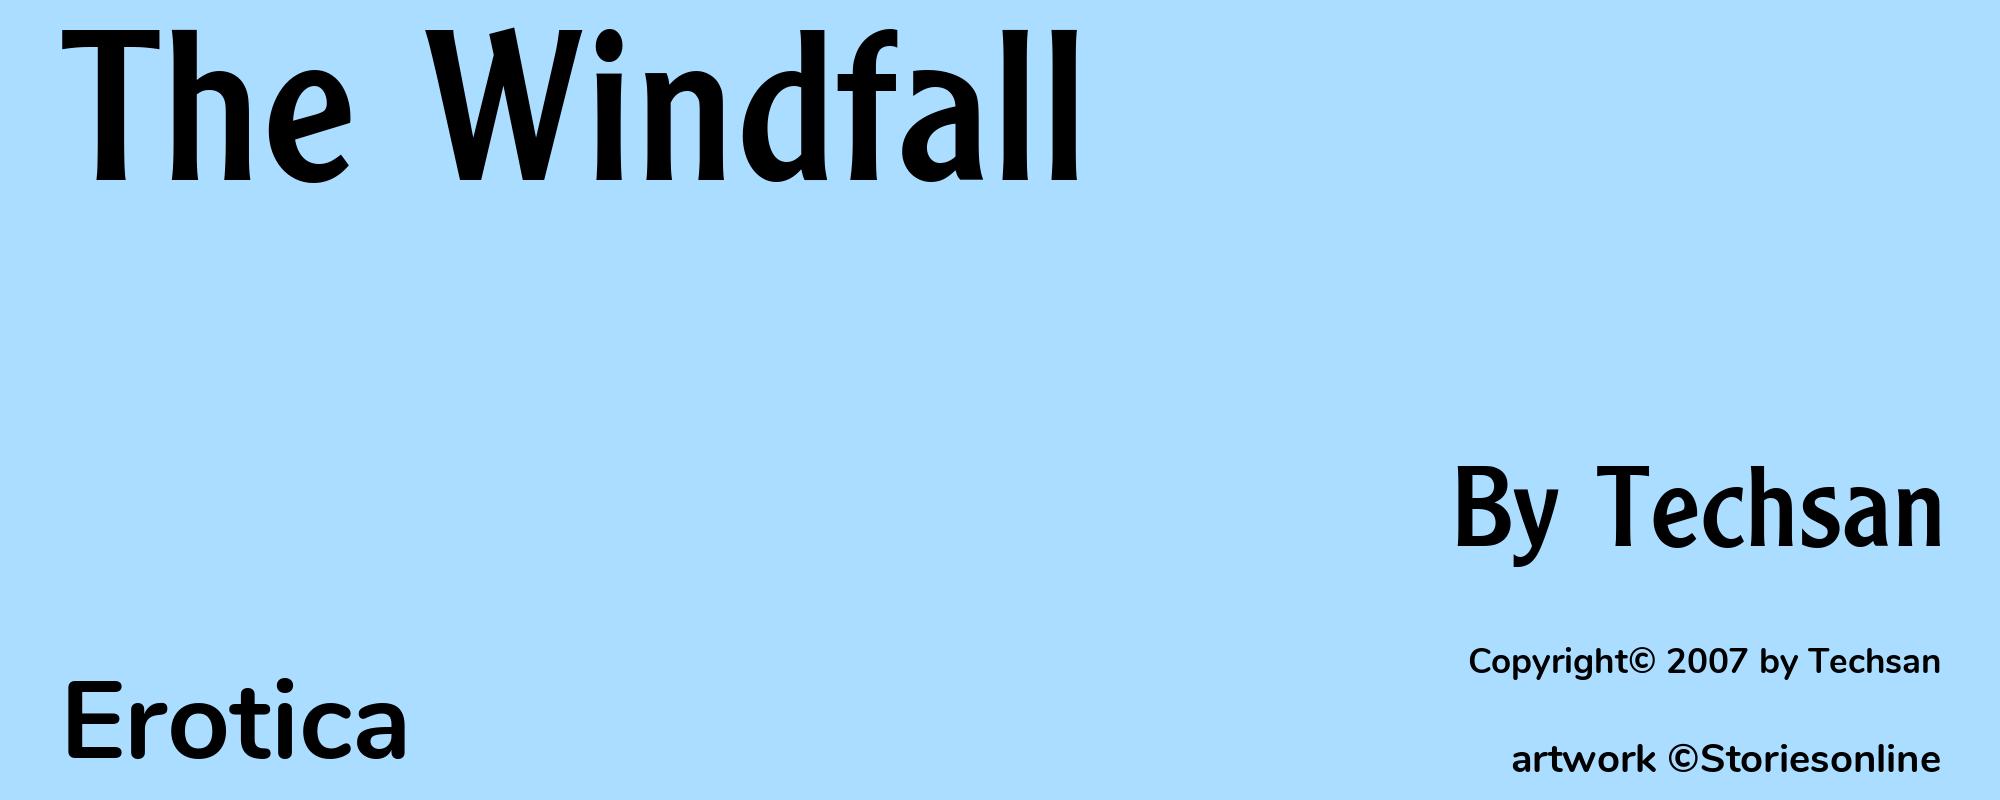 The Windfall - Cover